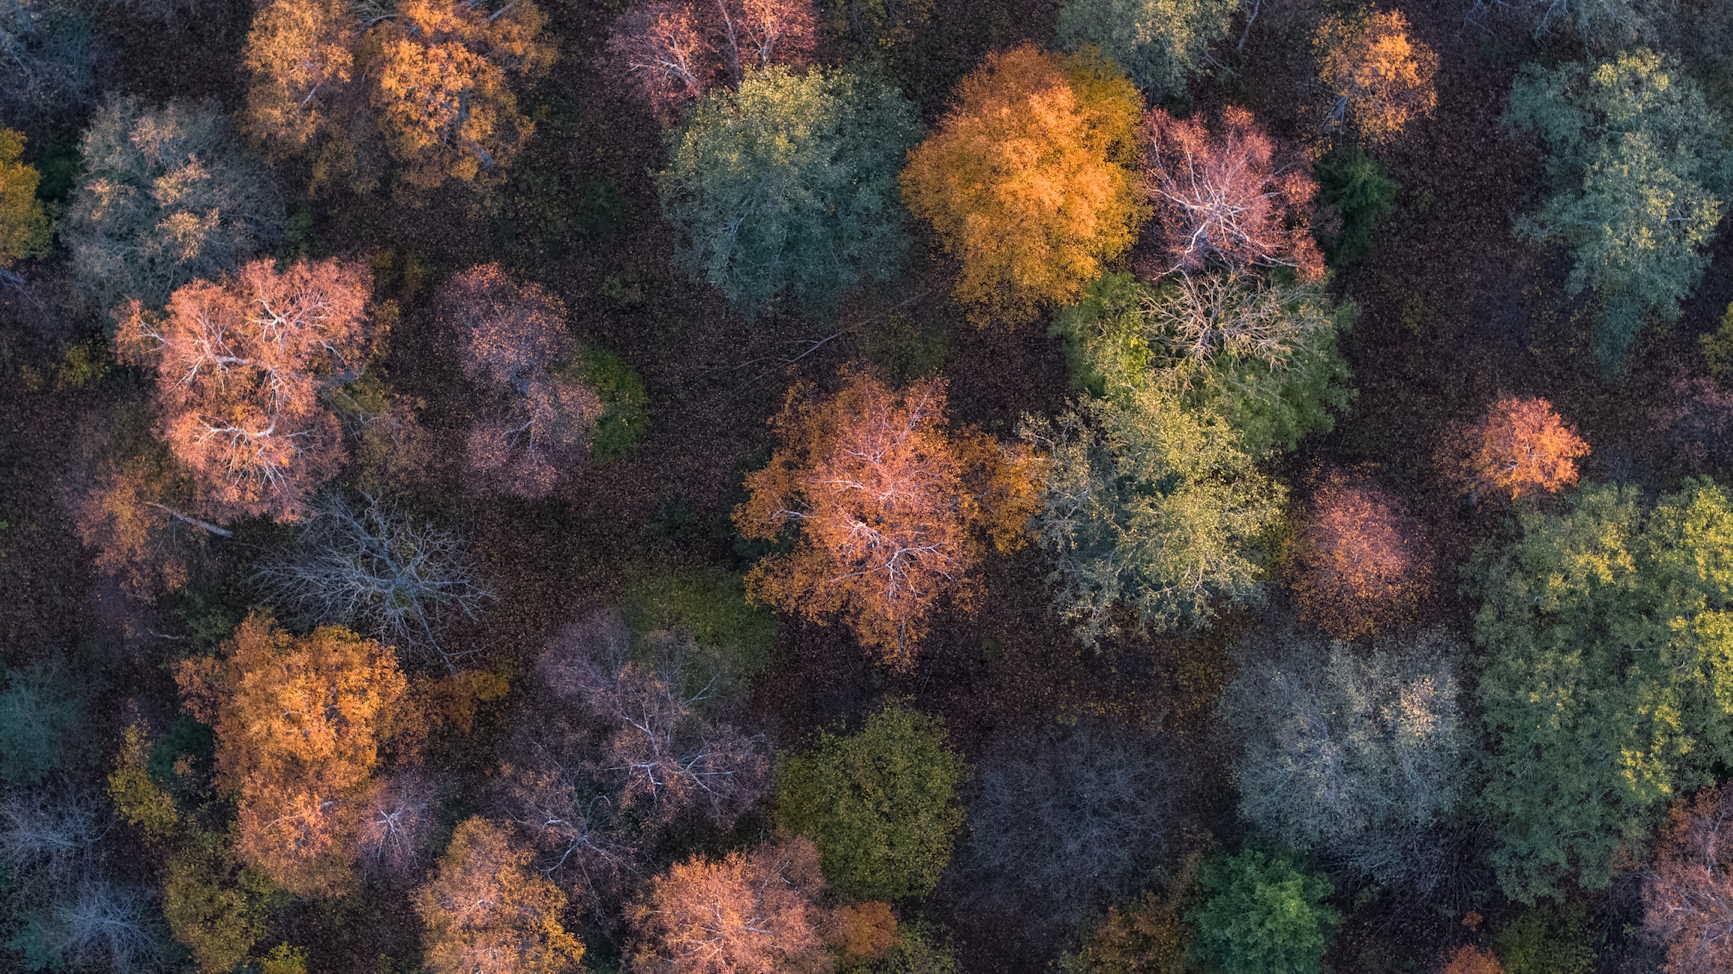 Autumn colors in the woods